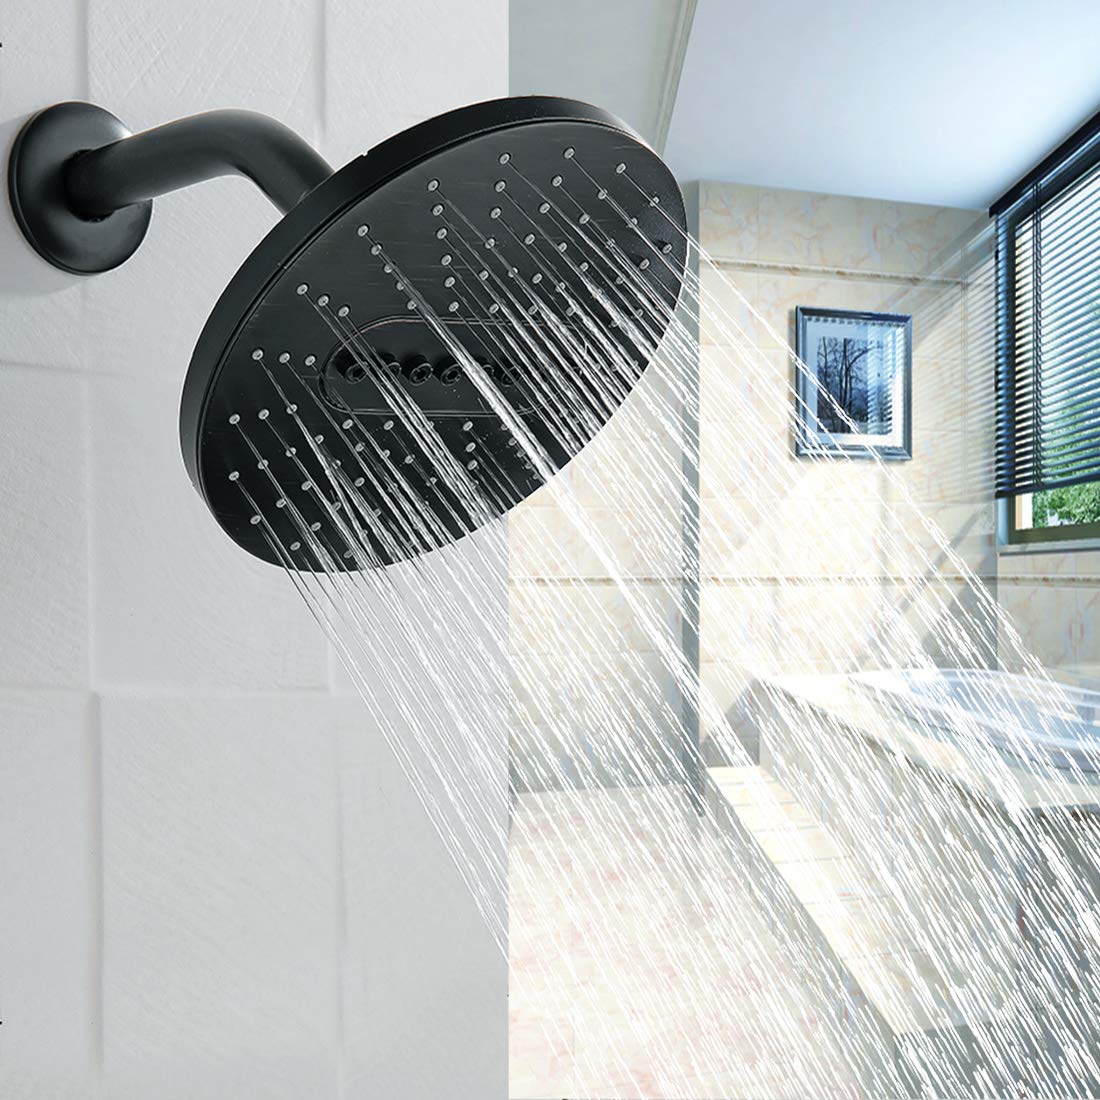 Rainfall Shower Head Fixed Showerhead, 6.3 Inch Rain Showerhead, 2-Setting with Adjustable Angles, Awesome Shower Experience, Tool Free Installation, Oil Rubbed Bronze